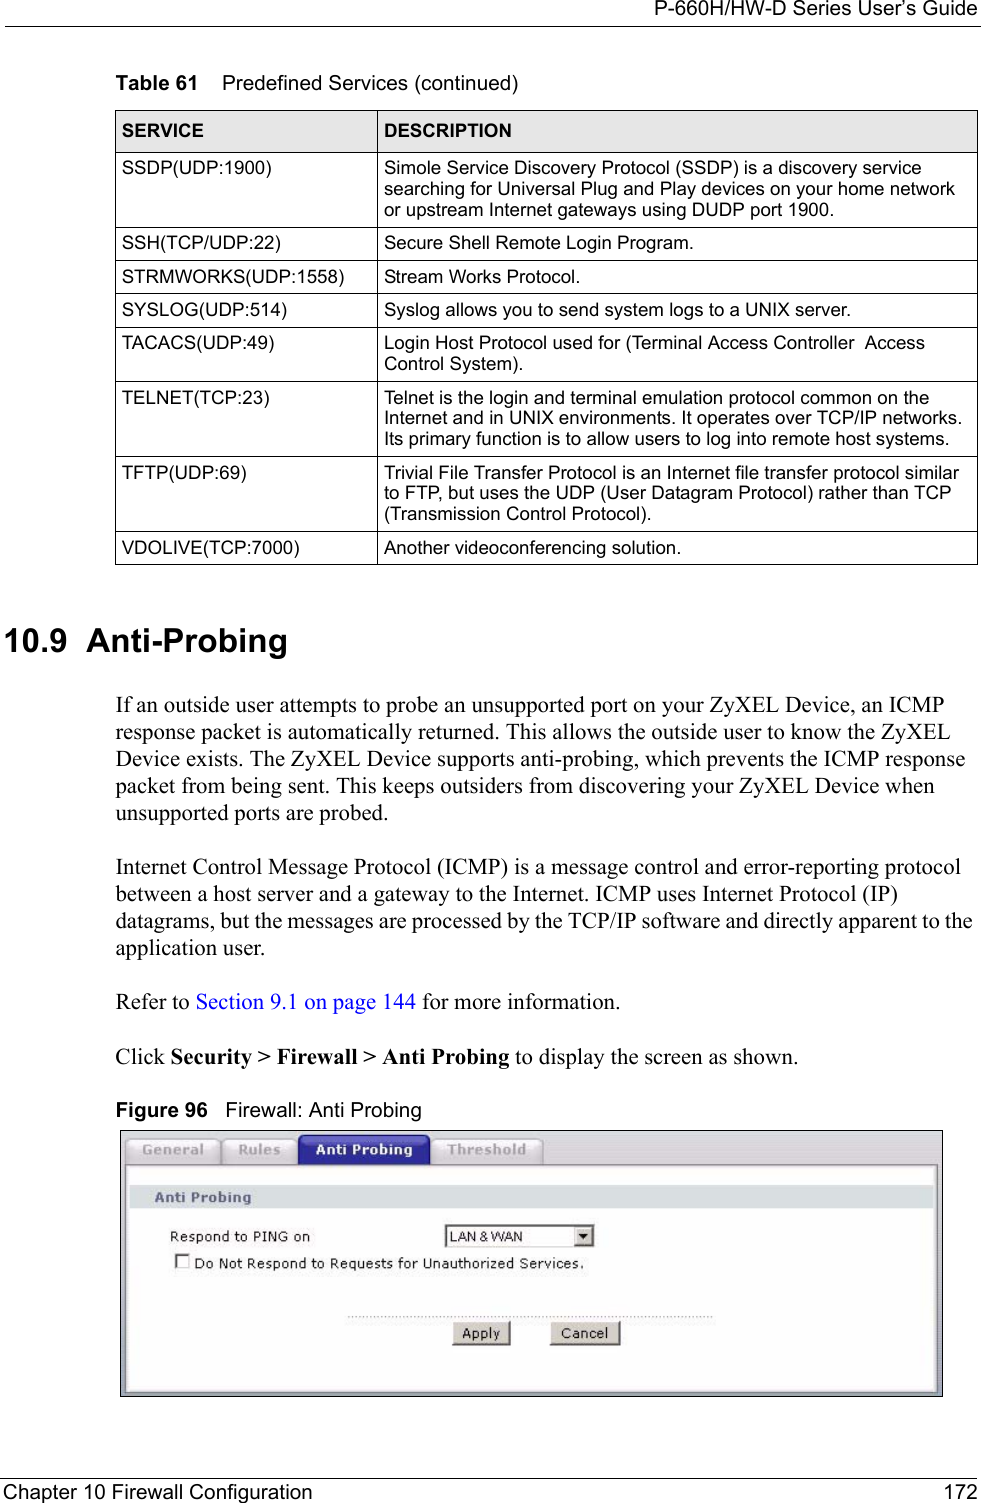 P-660H/HW-D Series User’s GuideChapter 10 Firewall Configuration 17210.9  Anti-Probing  If an outside user attempts to probe an unsupported port on your ZyXEL Device, an ICMP response packet is automatically returned. This allows the outside user to know the ZyXEL Device exists. The ZyXEL Device supports anti-probing, which prevents the ICMP response packet from being sent. This keeps outsiders from discovering your ZyXEL Device when unsupported ports are probed.  Internet Control Message Protocol (ICMP) is a message control and error-reporting protocol between a host server and a gateway to the Internet. ICMP uses Internet Protocol (IP) datagrams, but the messages are processed by the TCP/IP software and directly apparent to the application user.  Refer to Section 9.1 on page 144 for more information. Click Security &gt; Firewall &gt; Anti Probing to display the screen as shown. Figure 96   Firewall: Anti ProbingSSDP(UDP:1900) Simole Service Discovery Protocol (SSDP) is a discovery service searching for Universal Plug and Play devices on your home network or upstream Internet gateways using DUDP port 1900. SSH(TCP/UDP:22) Secure Shell Remote Login Program.STRMWORKS(UDP:1558)  Stream Works Protocol.SYSLOG(UDP:514) Syslog allows you to send system logs to a UNIX server.TACACS(UDP:49)  Login Host Protocol used for (Terminal Access Controller  Access Control System).TELNET(TCP:23)  Telnet is the login and terminal emulation protocol common on the Internet and in UNIX environments. It operates over TCP/IP networks. Its primary function is to allow users to log into remote host systems.TFTP(UDP:69)  Trivial File Transfer Protocol is an Internet file transfer protocol similar to FTP, but uses the UDP (User Datagram Protocol) rather than TCP (Transmission Control Protocol).VDOLIVE(TCP:7000)  Another videoconferencing solution.Table 61    Predefined Services (continued)SERVICE DESCRIPTION